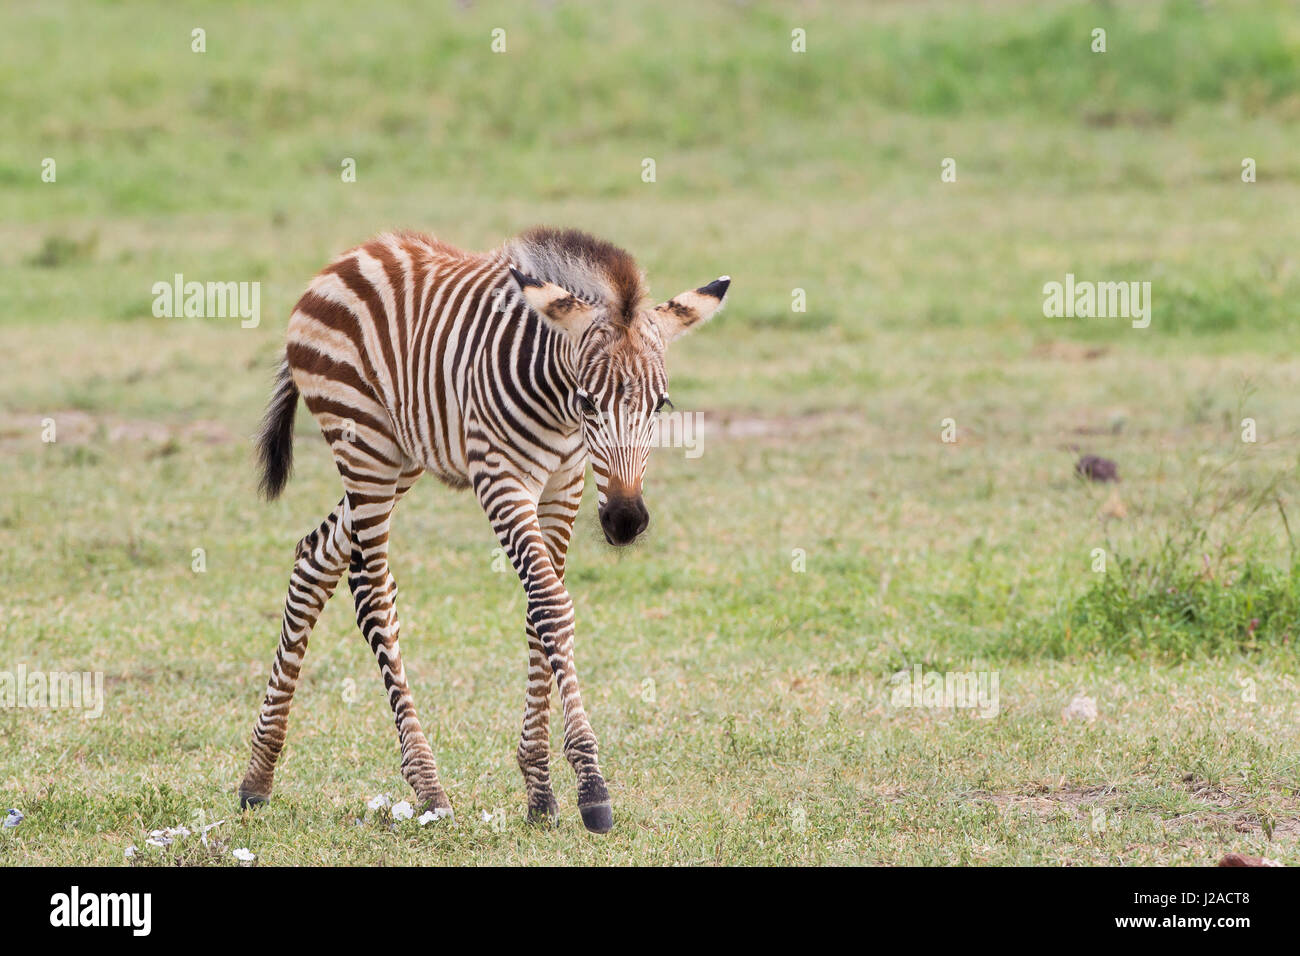 A Baby Zebra Stands on His Long Skinny Legs Photograph by Derrick Neill -  Pixels